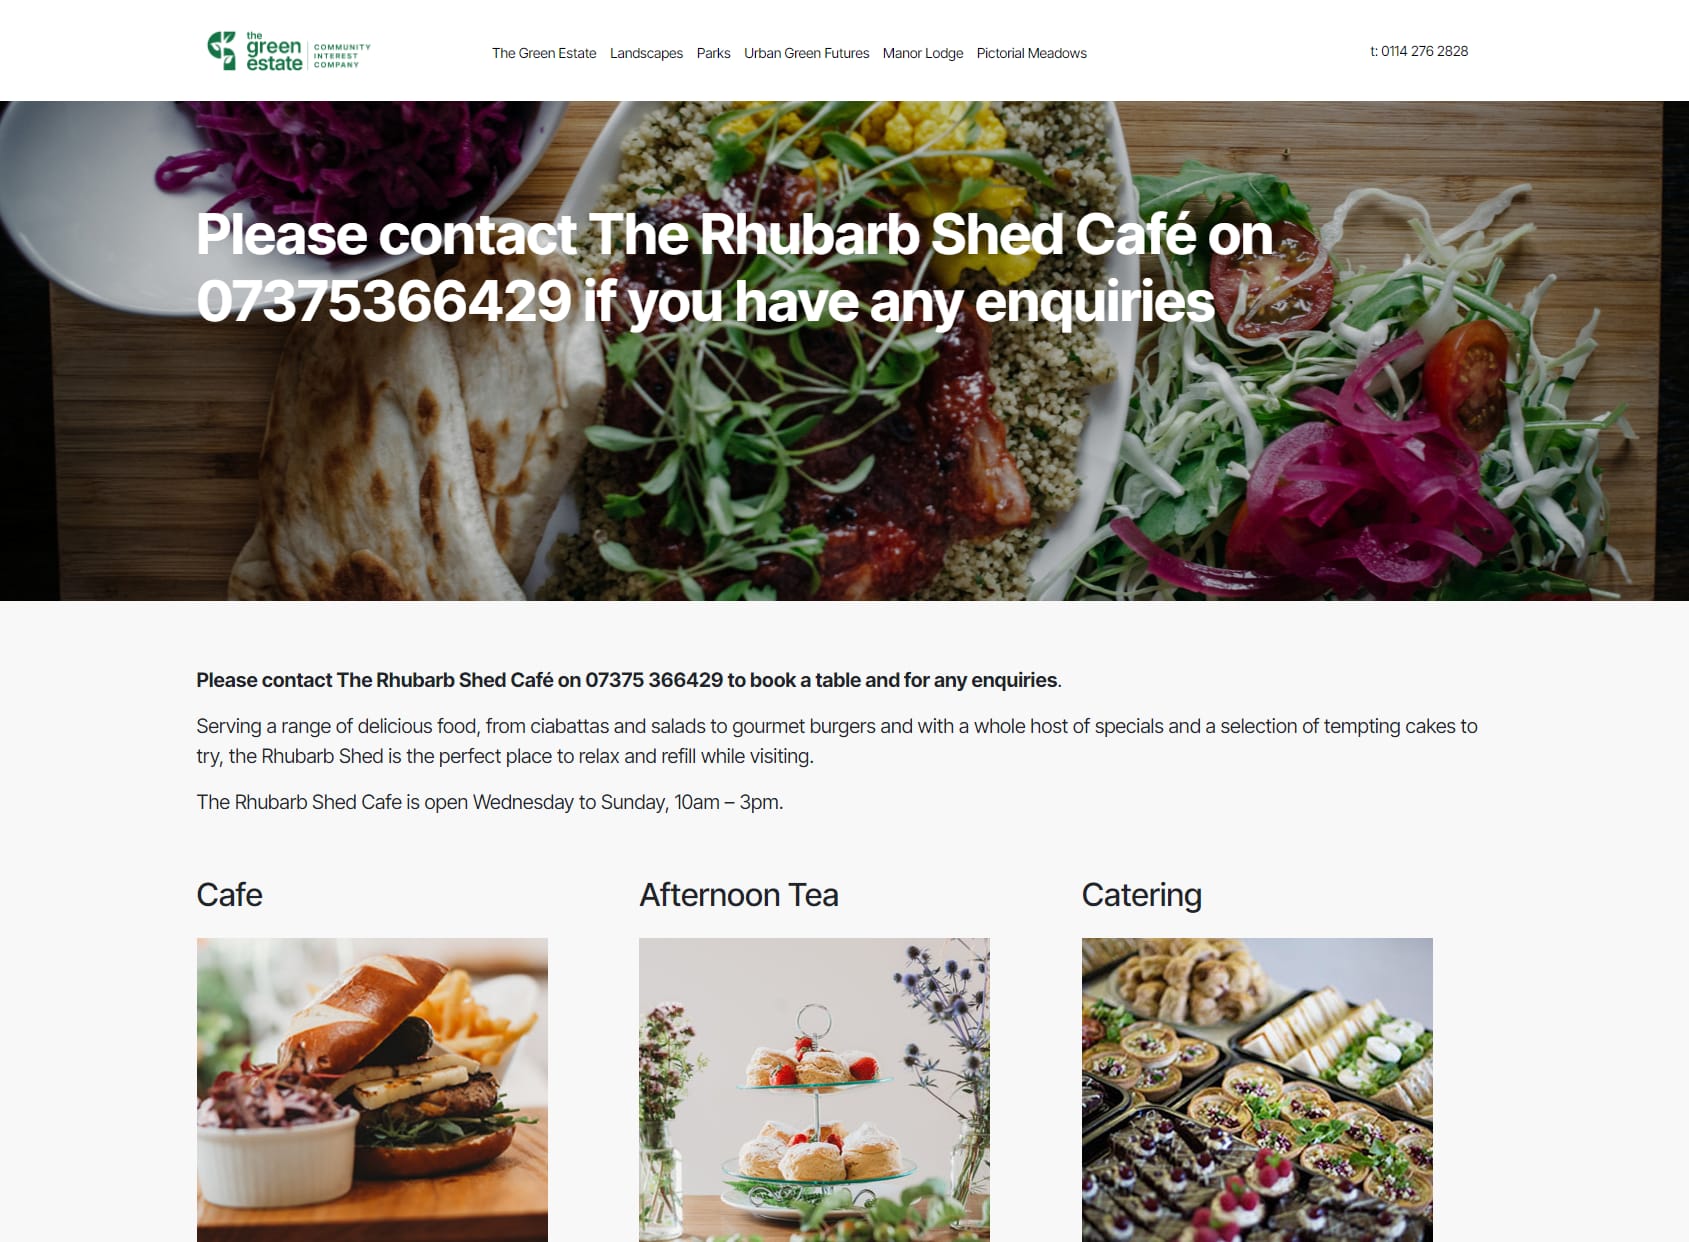 The Rhubarb Shed Cafe